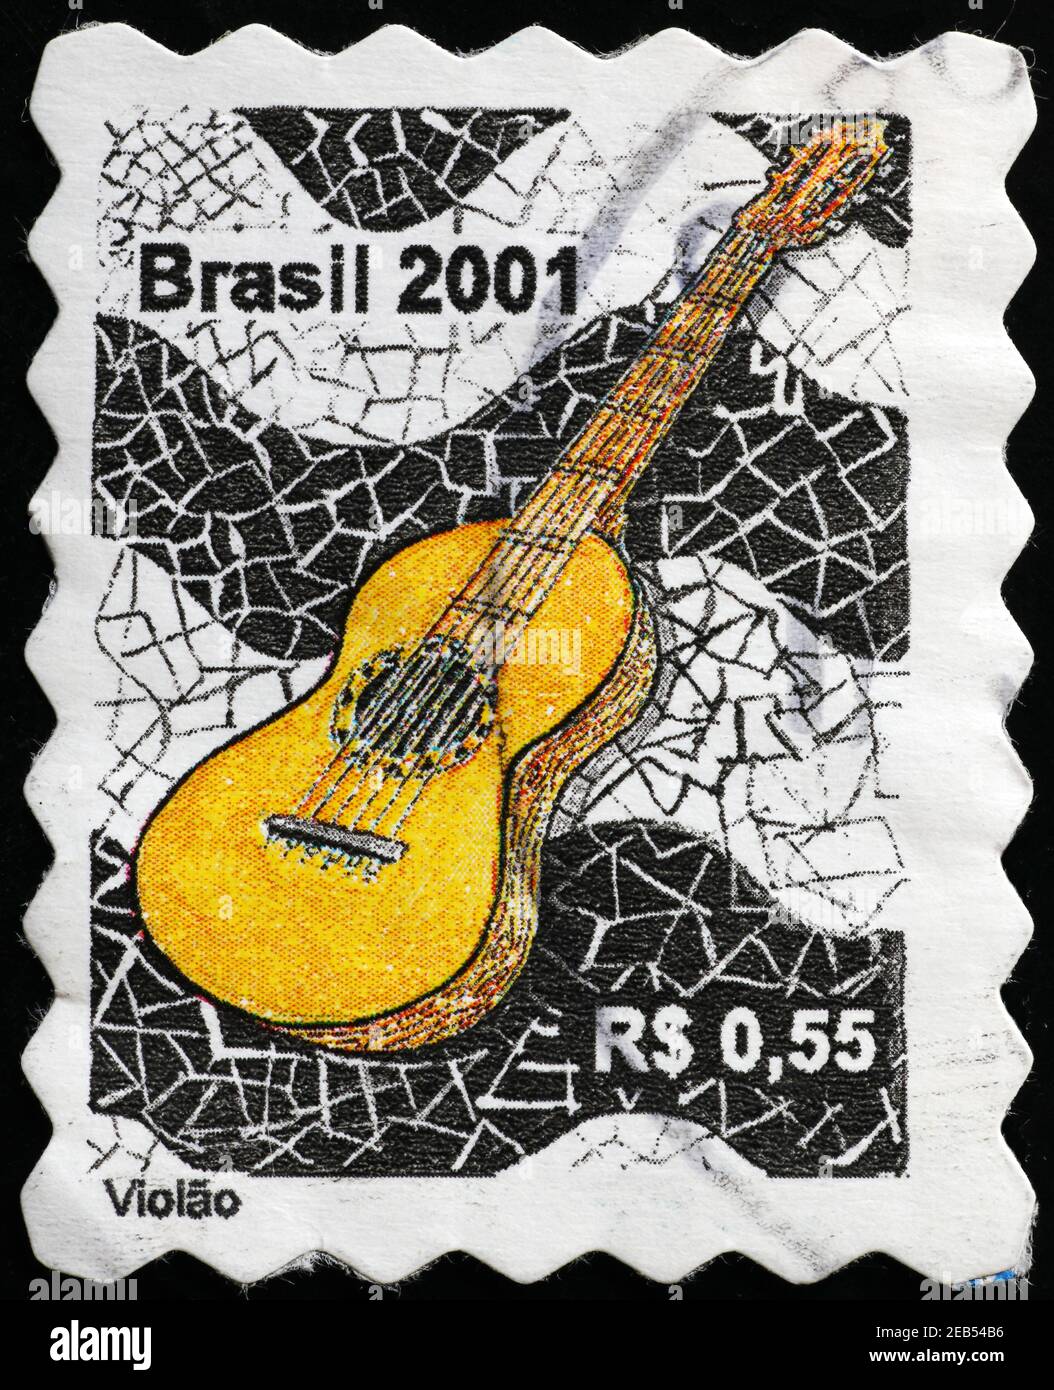 Guitar and typical portuguese floor on postage stamp Stock Photo